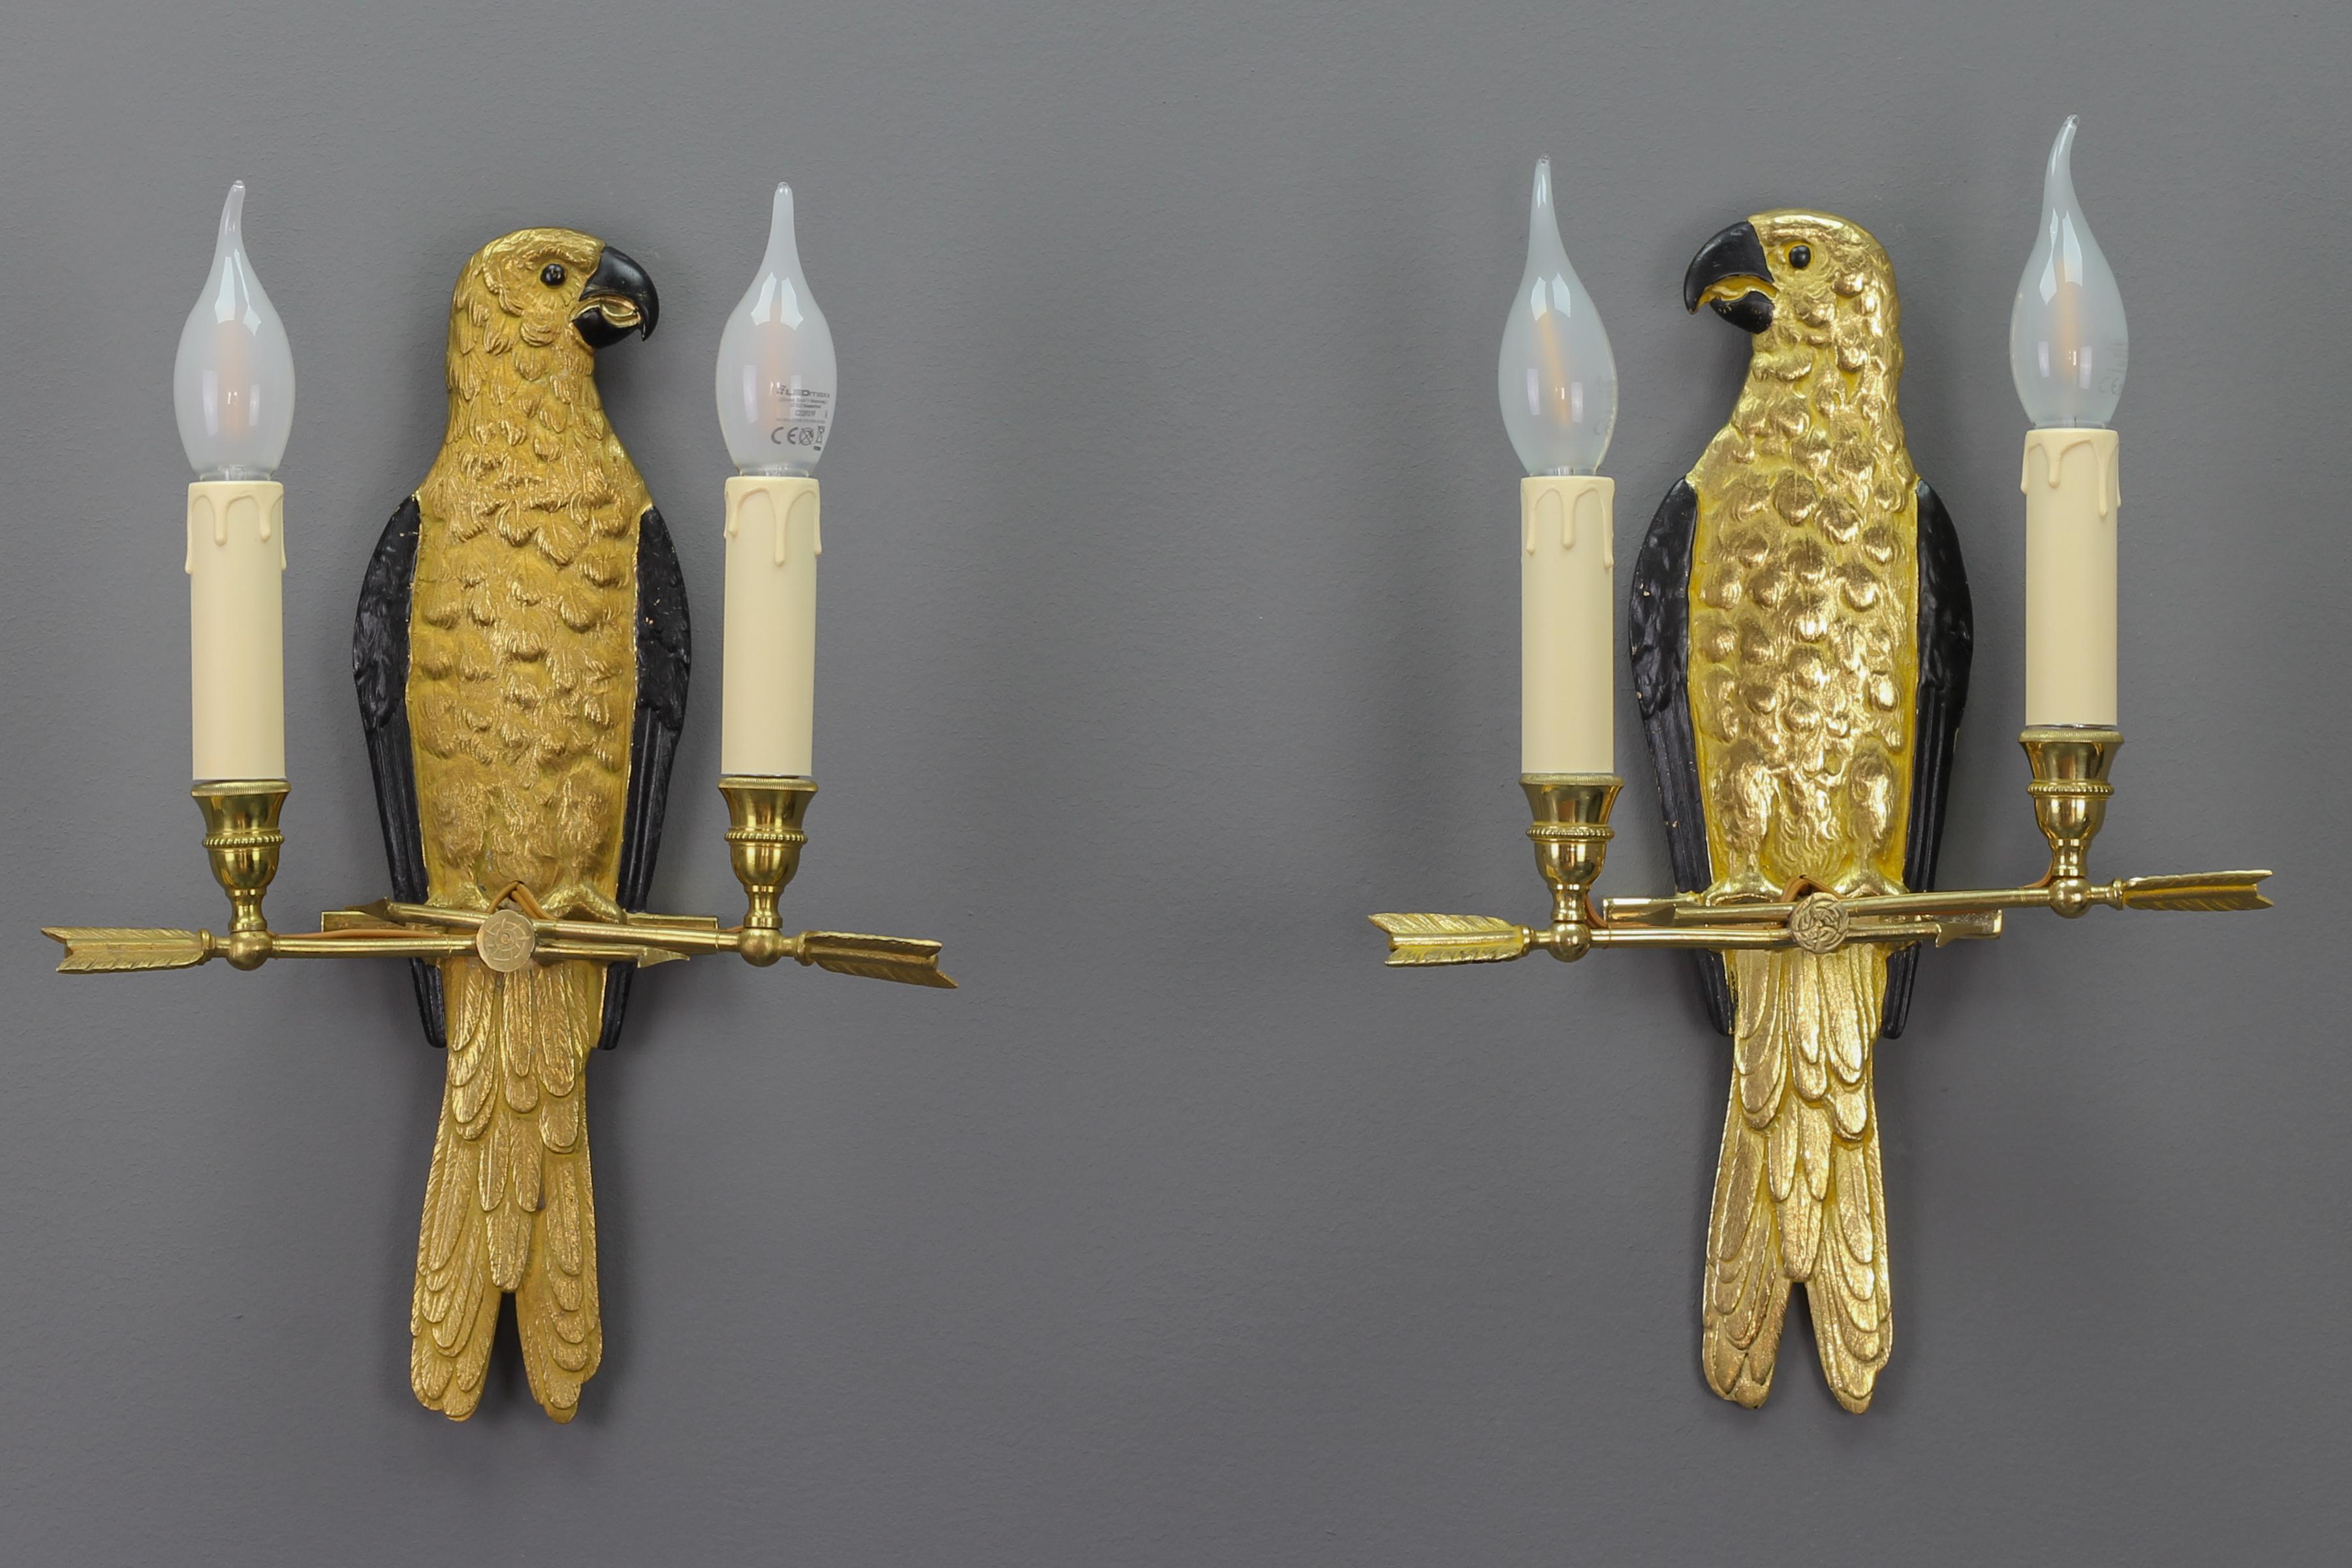 Pair of French gilt bronze two-light parrot wall sconces from the 1970s, attributed to Maison Jansen.
An impressive and beautiful pair of Hollywood Regency-style wall sconces depicting gilt bronze parrots with black painted wings, eyes, and beaks